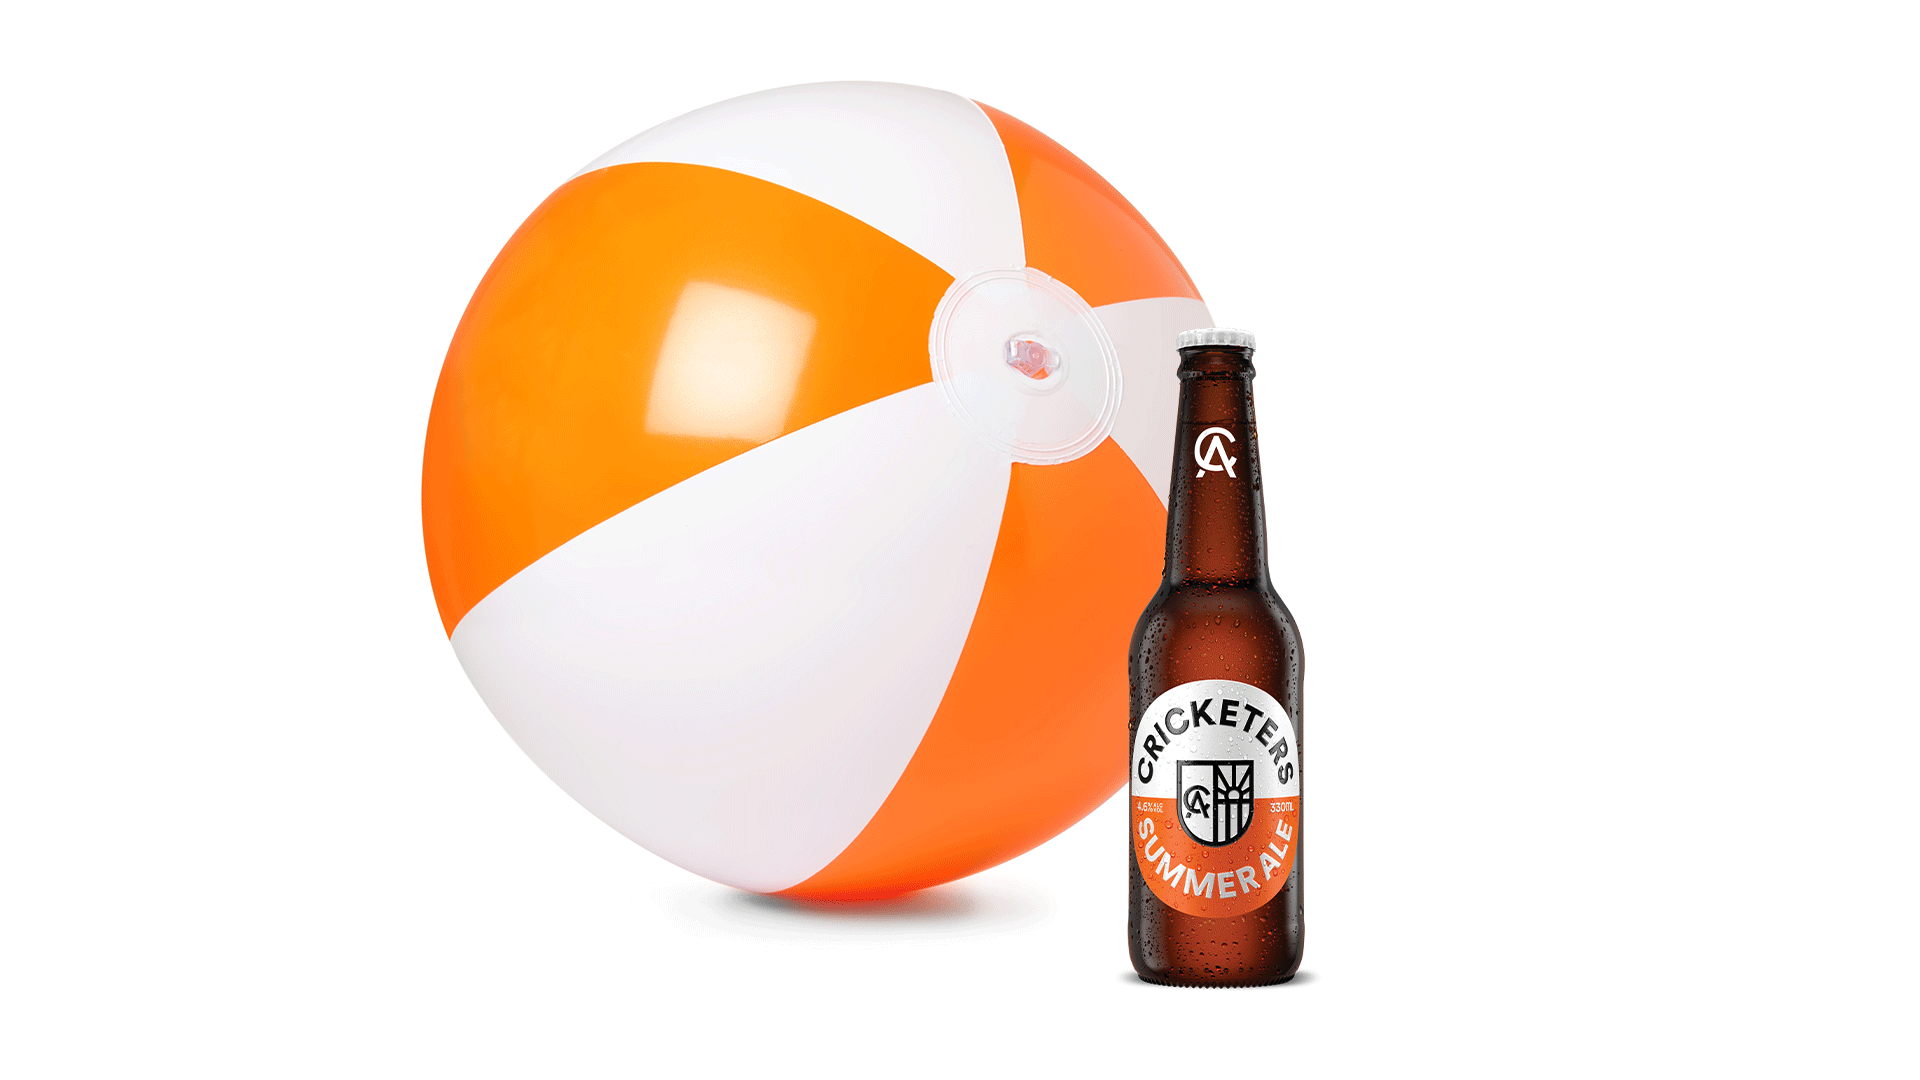 Cricketers Summer Ale branded bottle next to a blow up beach ball.